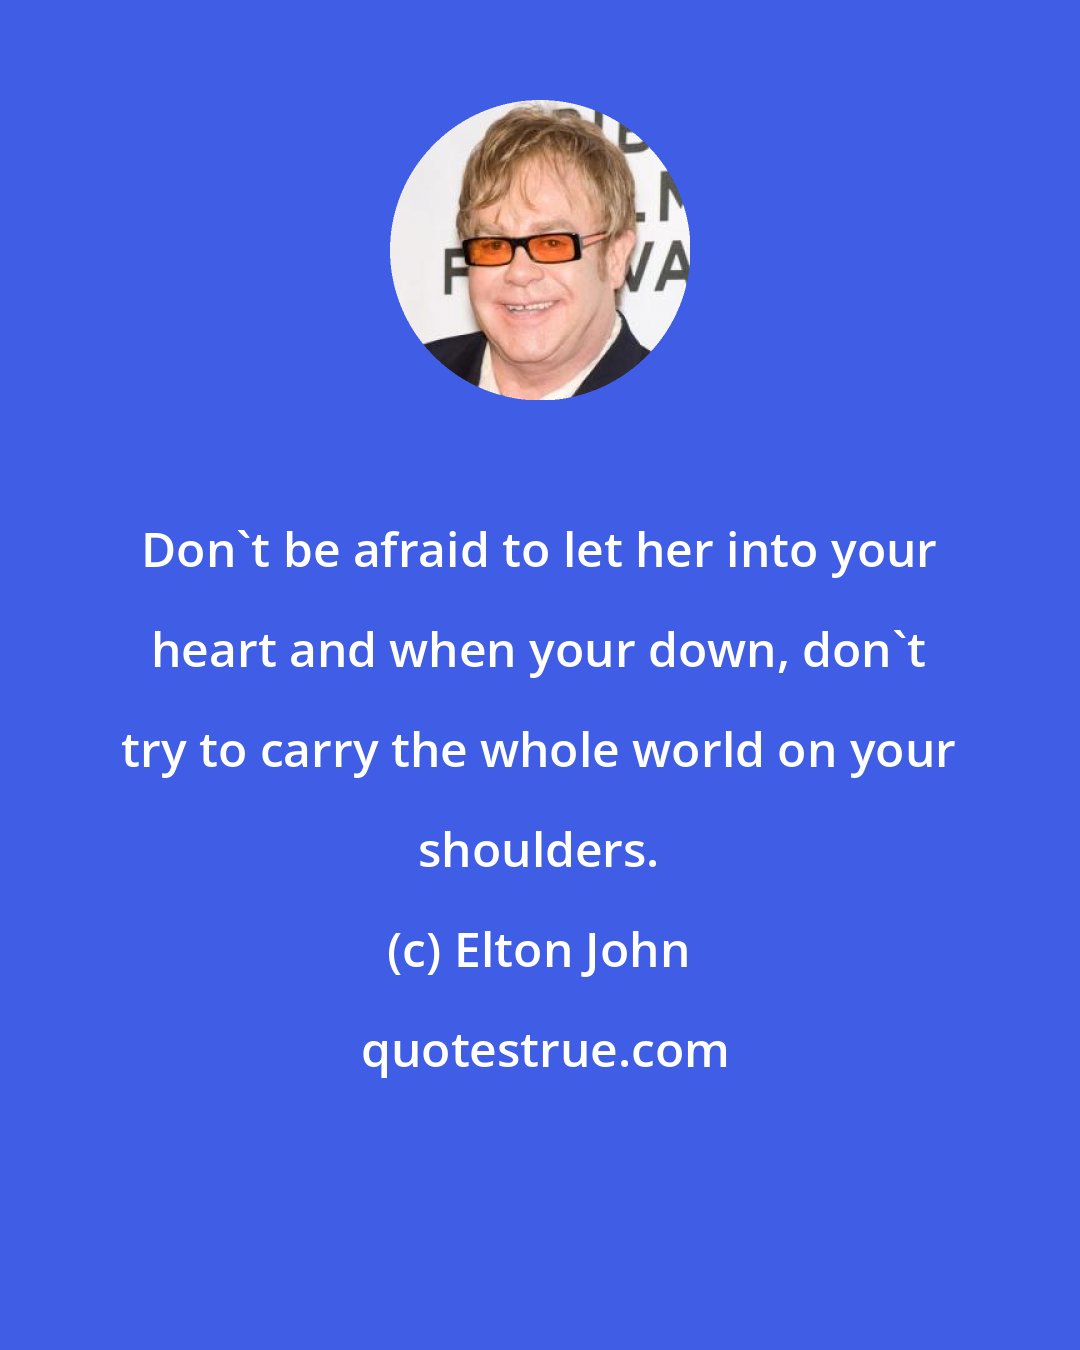 Elton John: Don't be afraid to let her into your heart and when your down, don't try to carry the whole world on your shoulders.